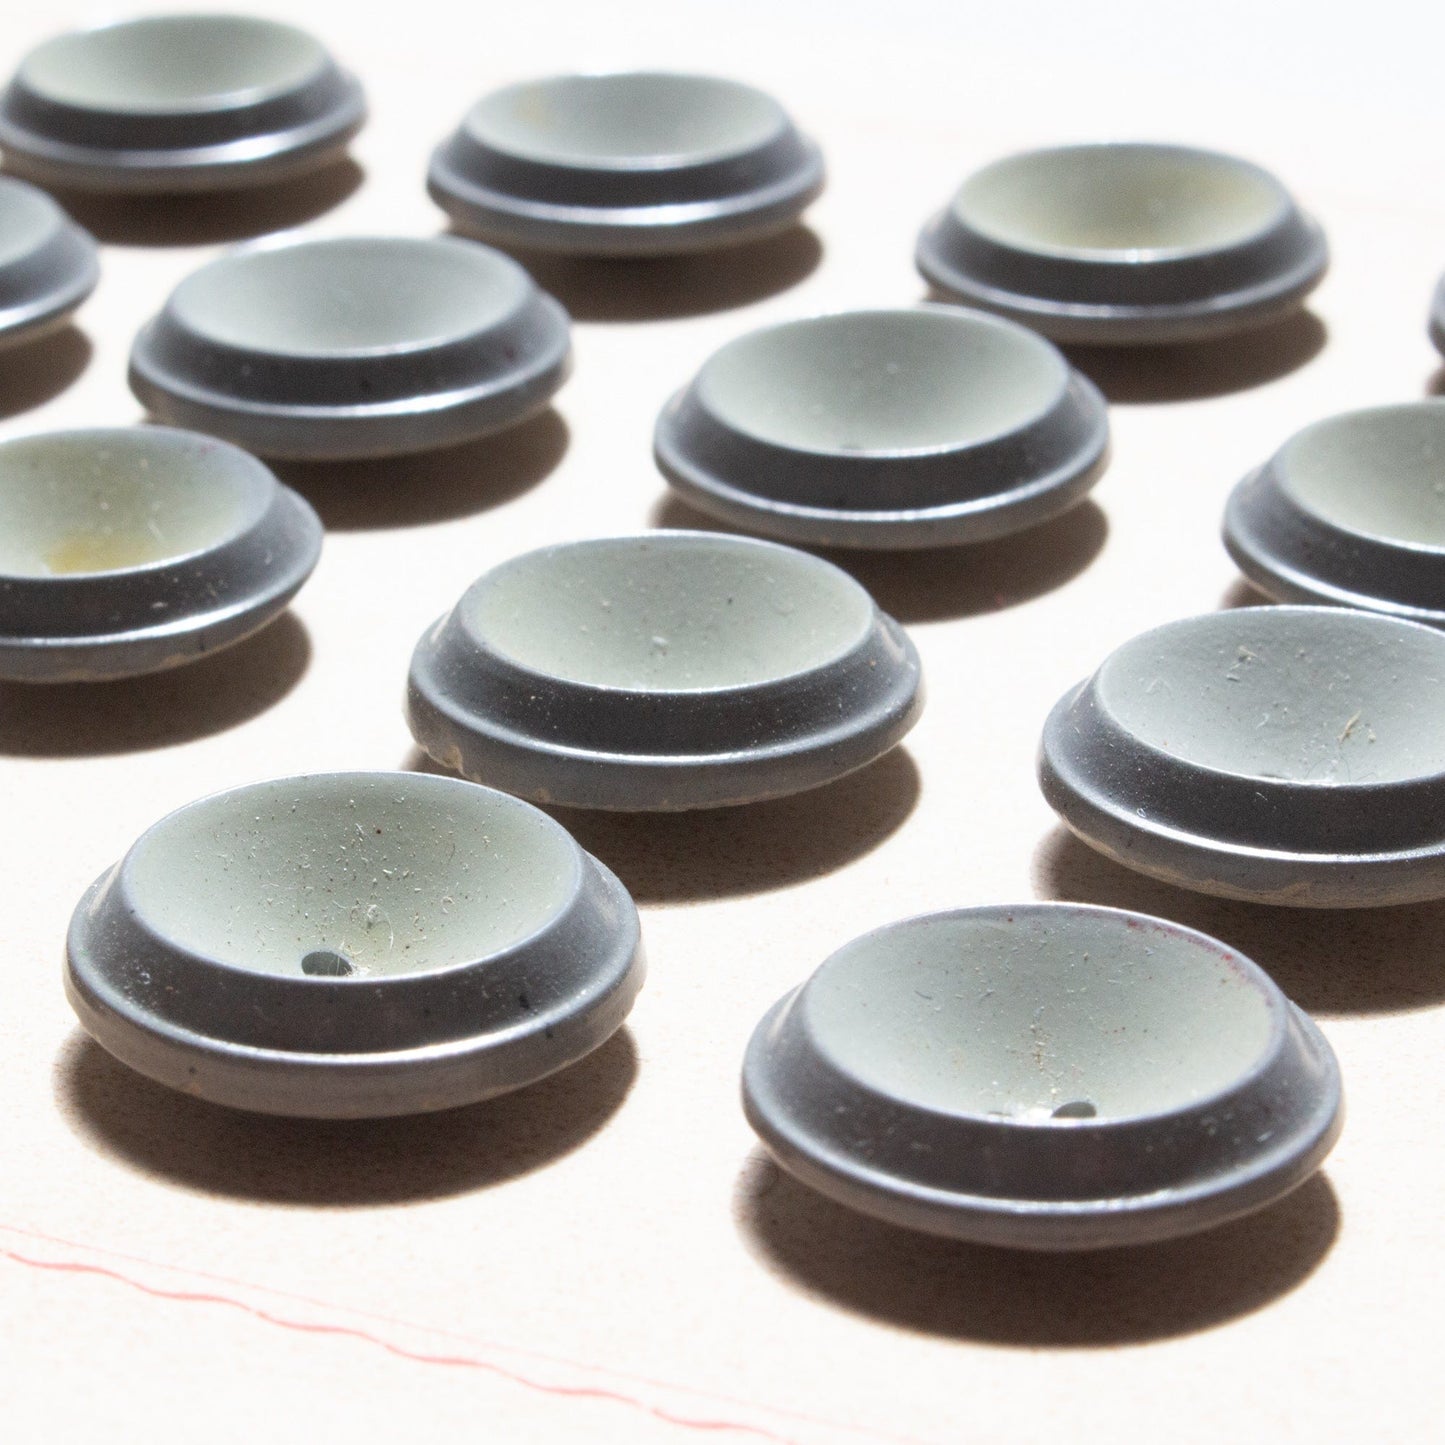 6 Vintage Italian Plastic Buttons in Shades of Grey - 20 mm